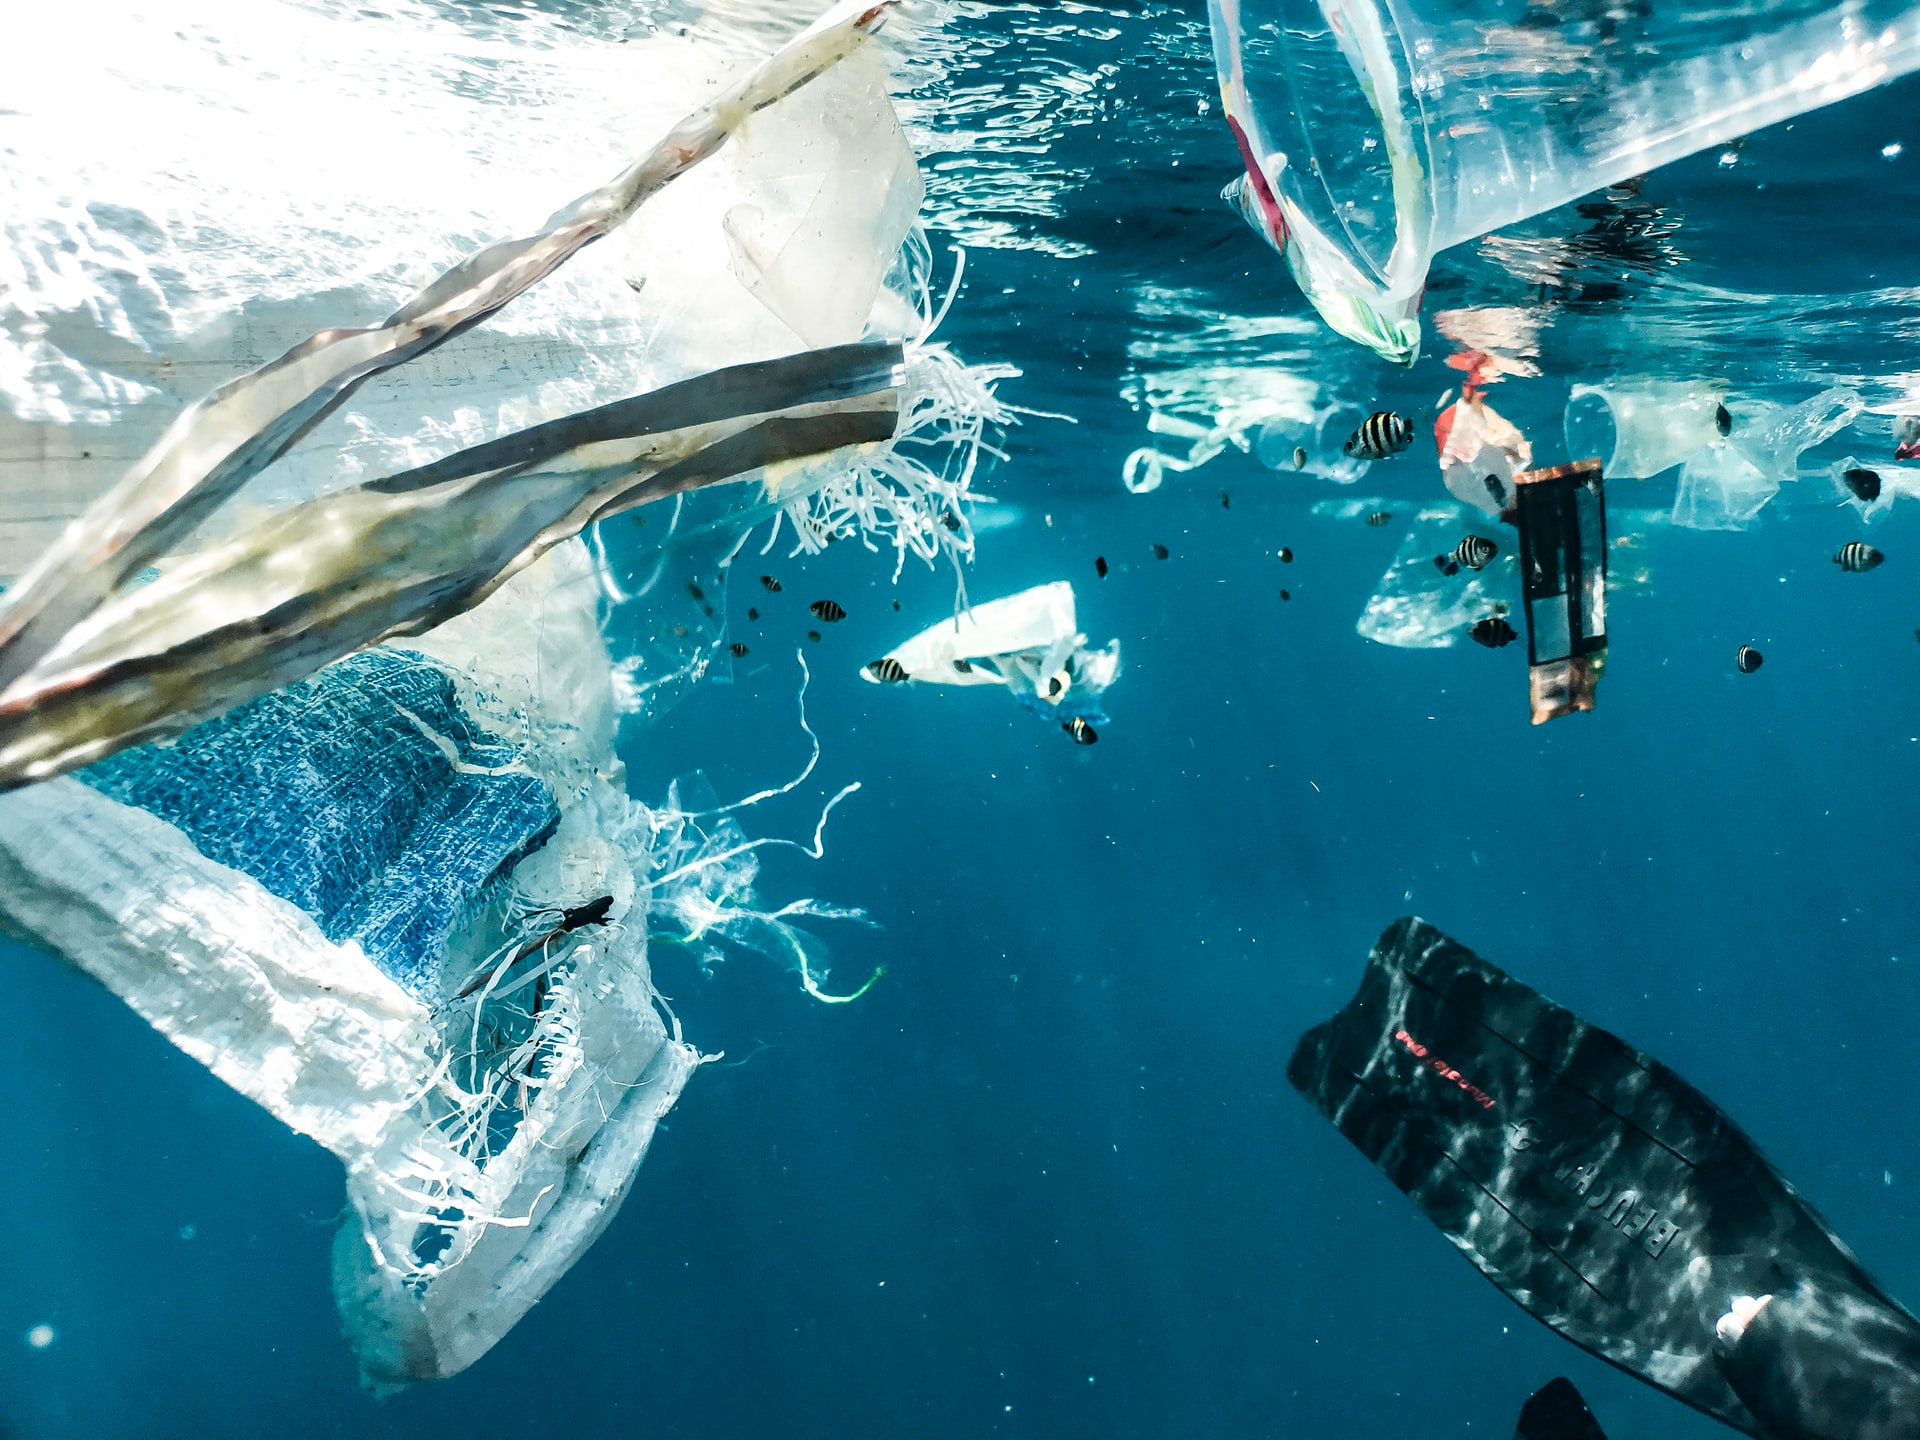 Plastic, bags, light bulbs, and many ther debris deep in sea waters